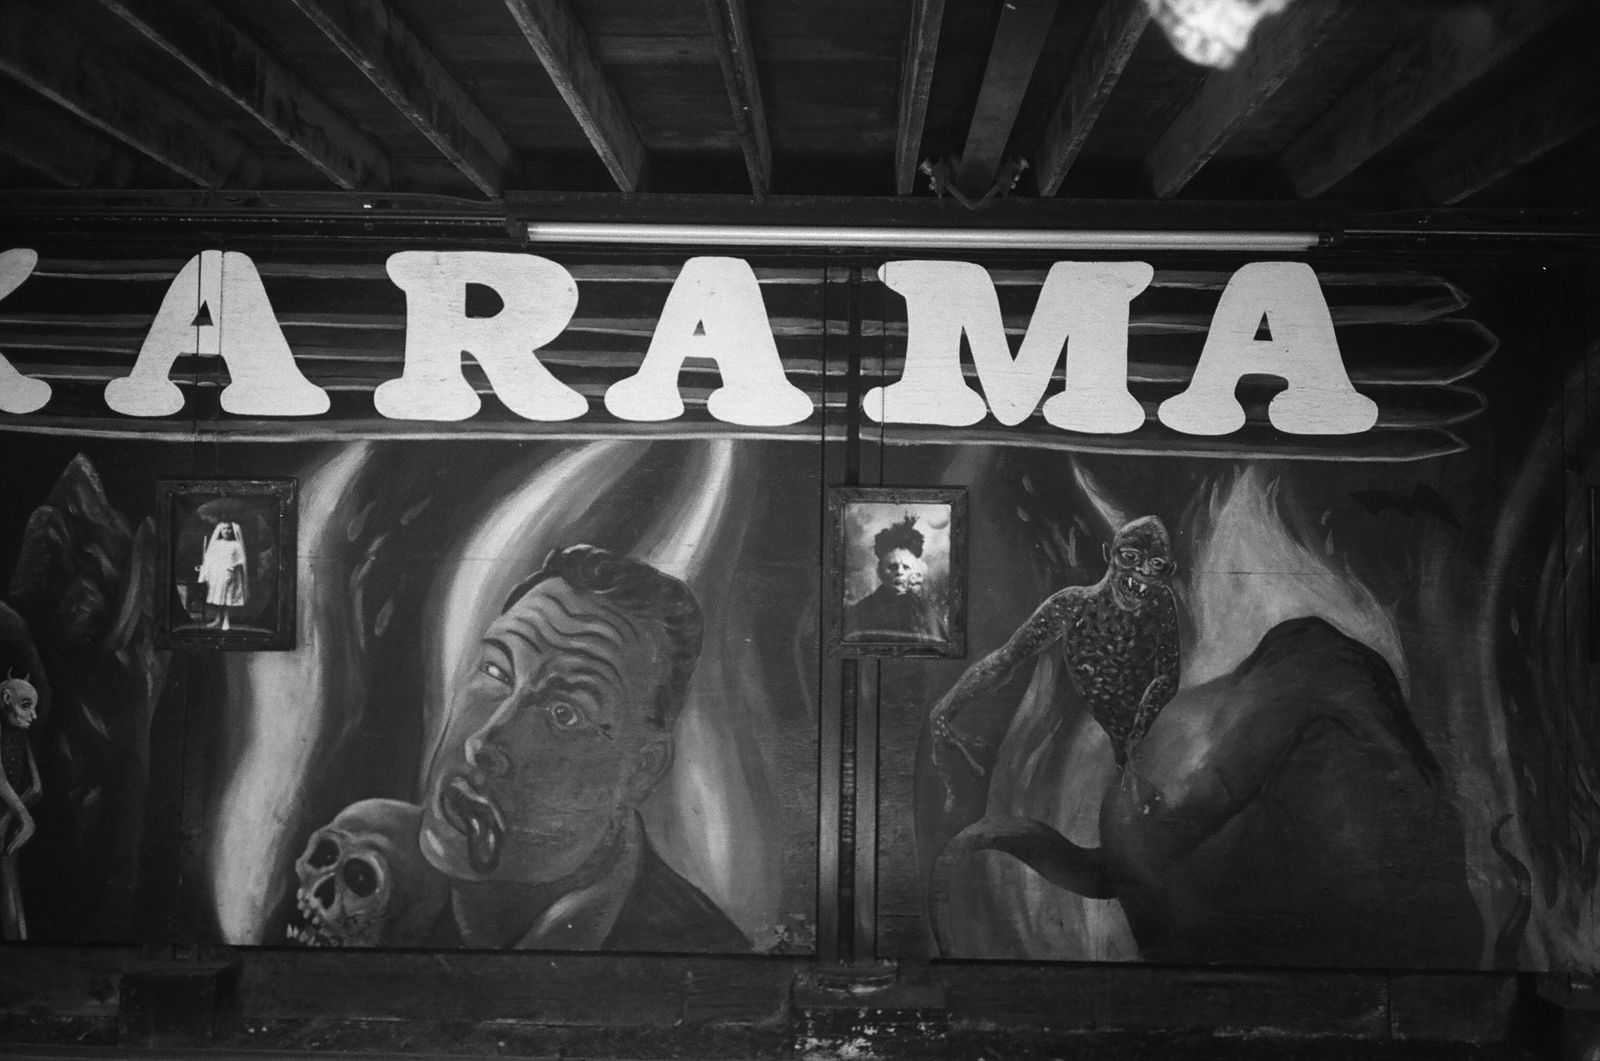 © Nikki Greene - Spookarama is the only ride I went on in Coney Island